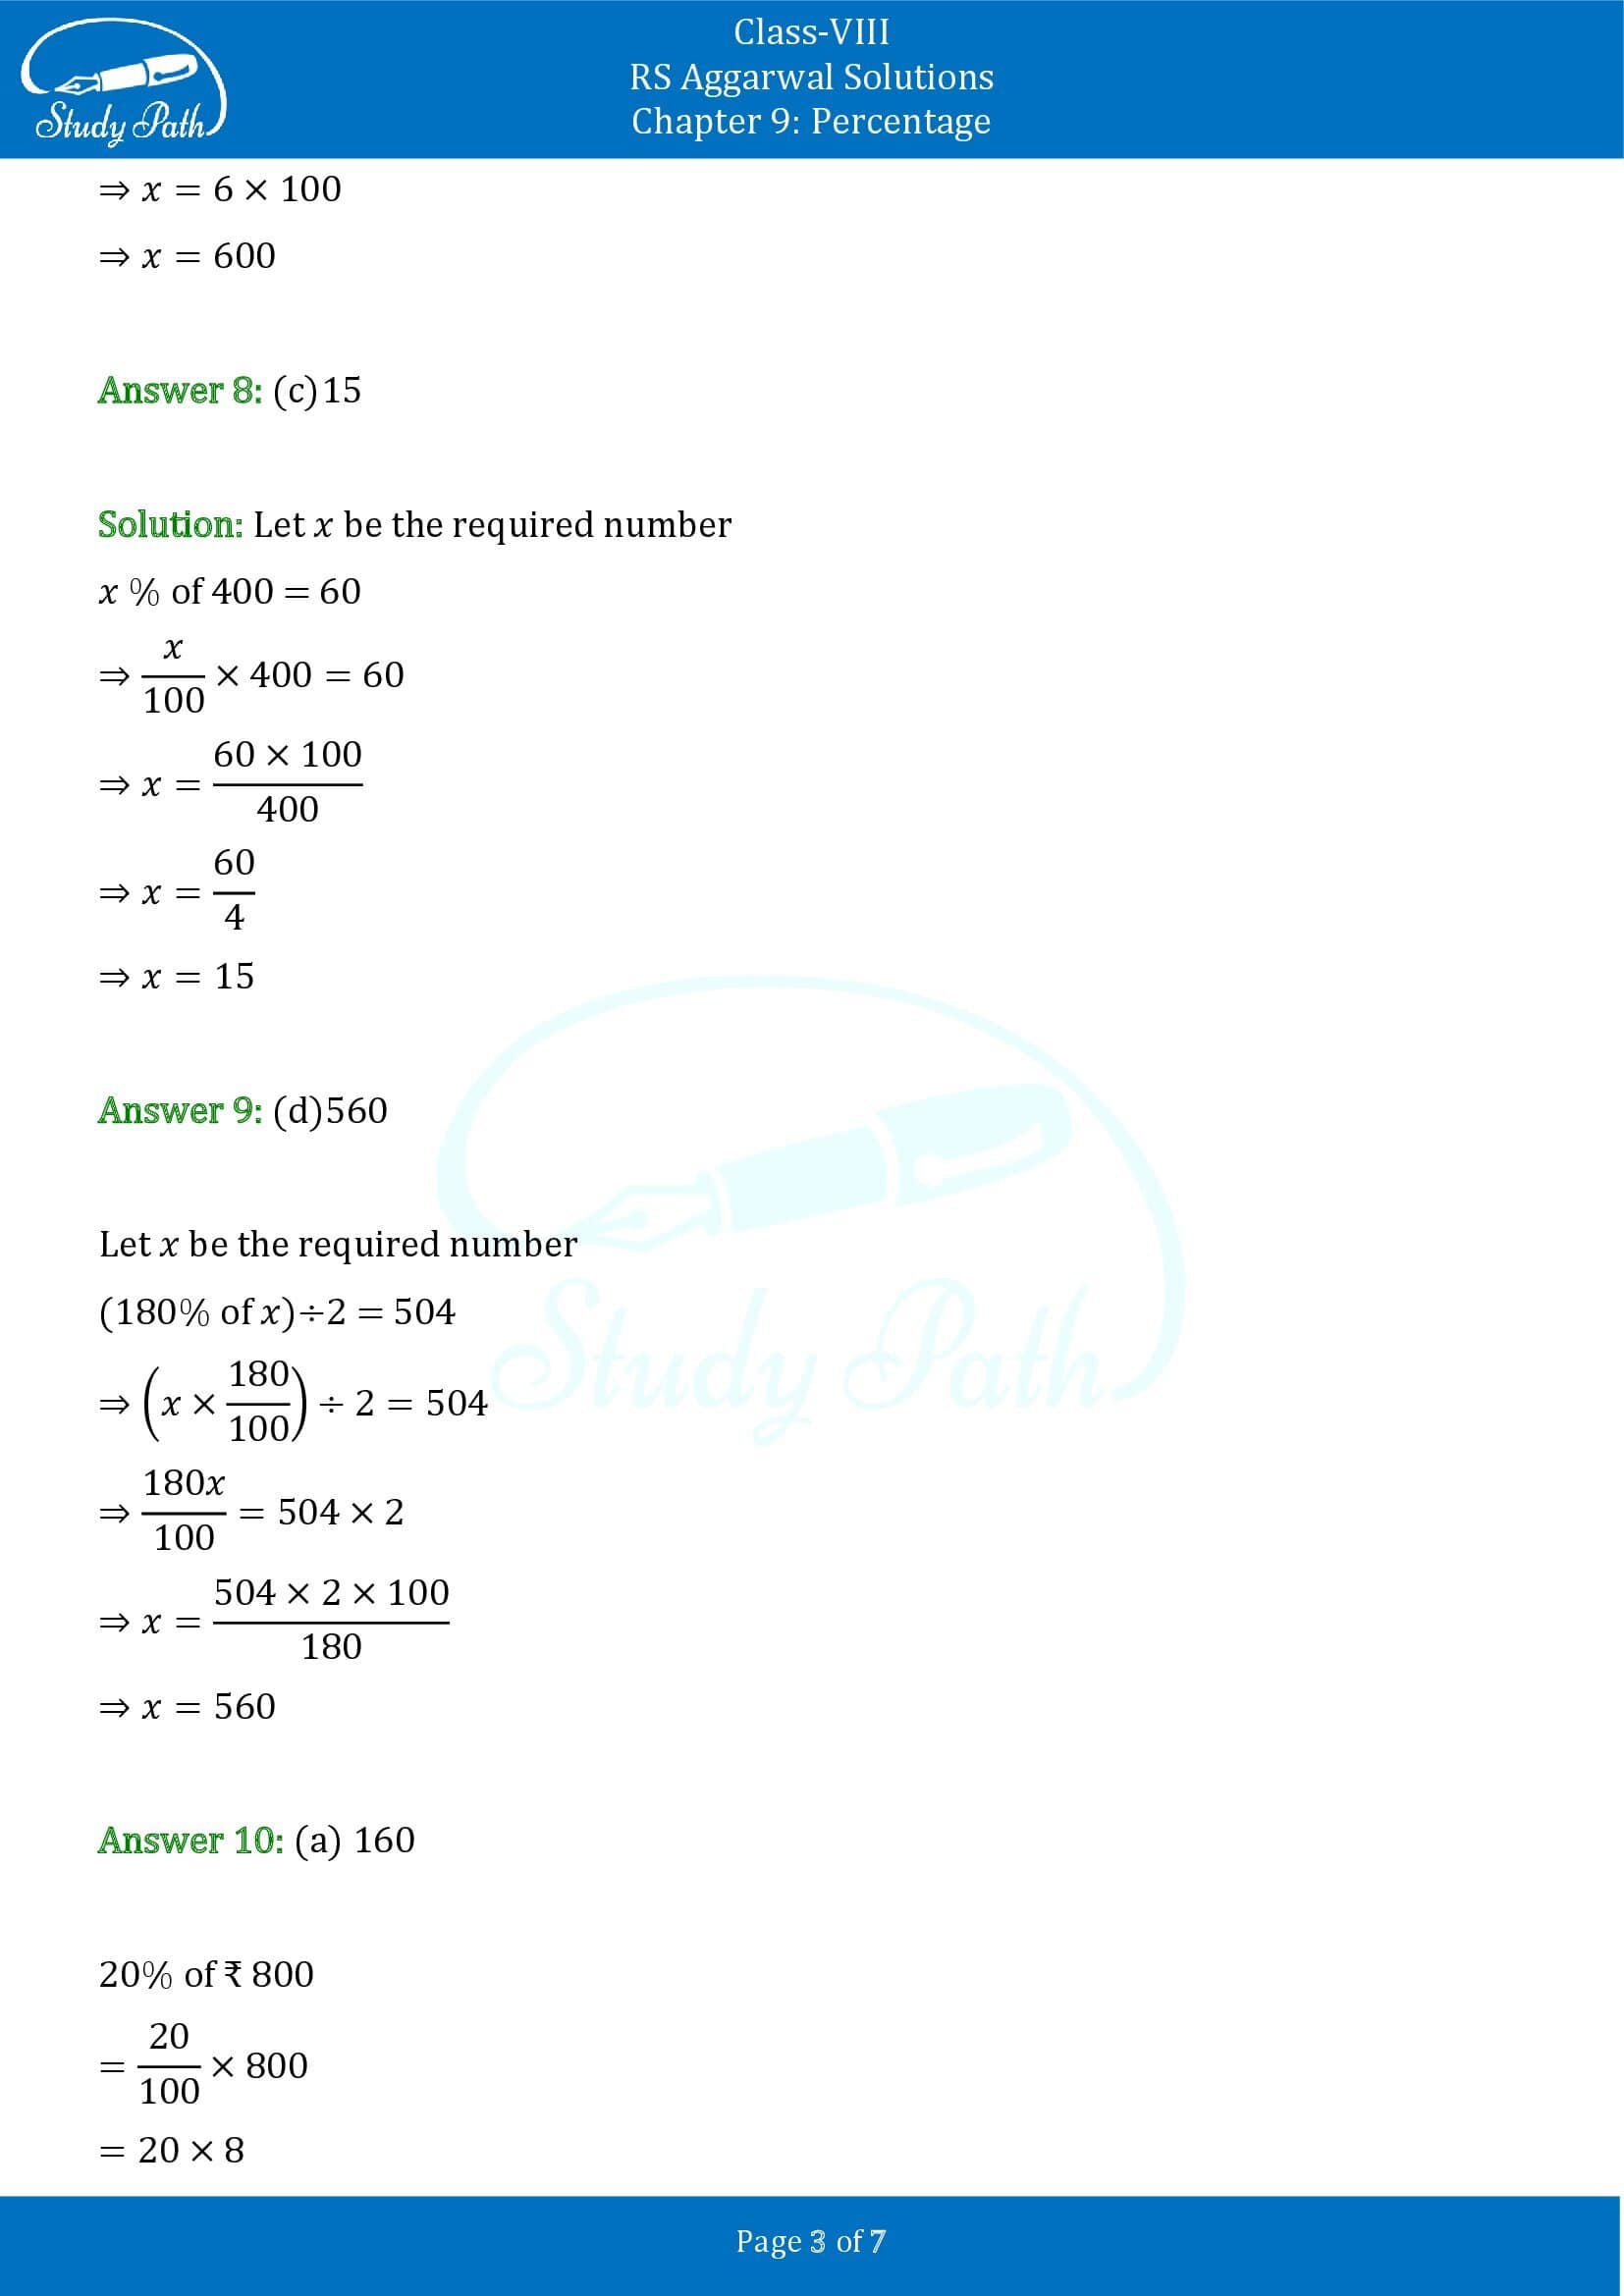 RS Aggarwal Solutions Class 8 Chapter 9 Percentage Exercise 9B MCQs 0003